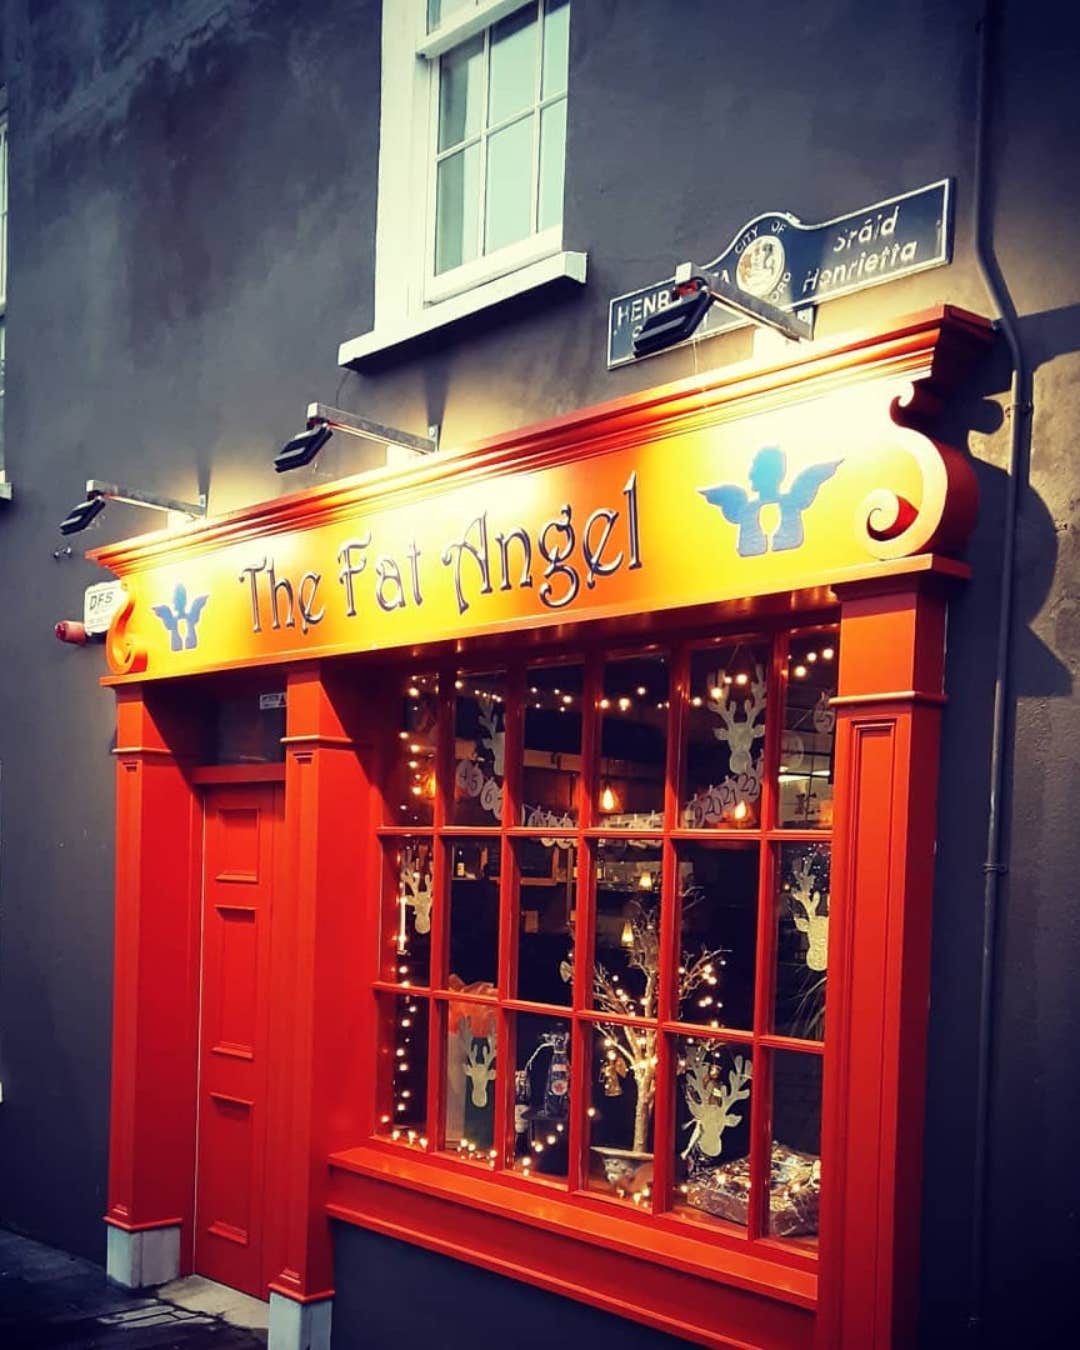 The Fat Angel, Waterford